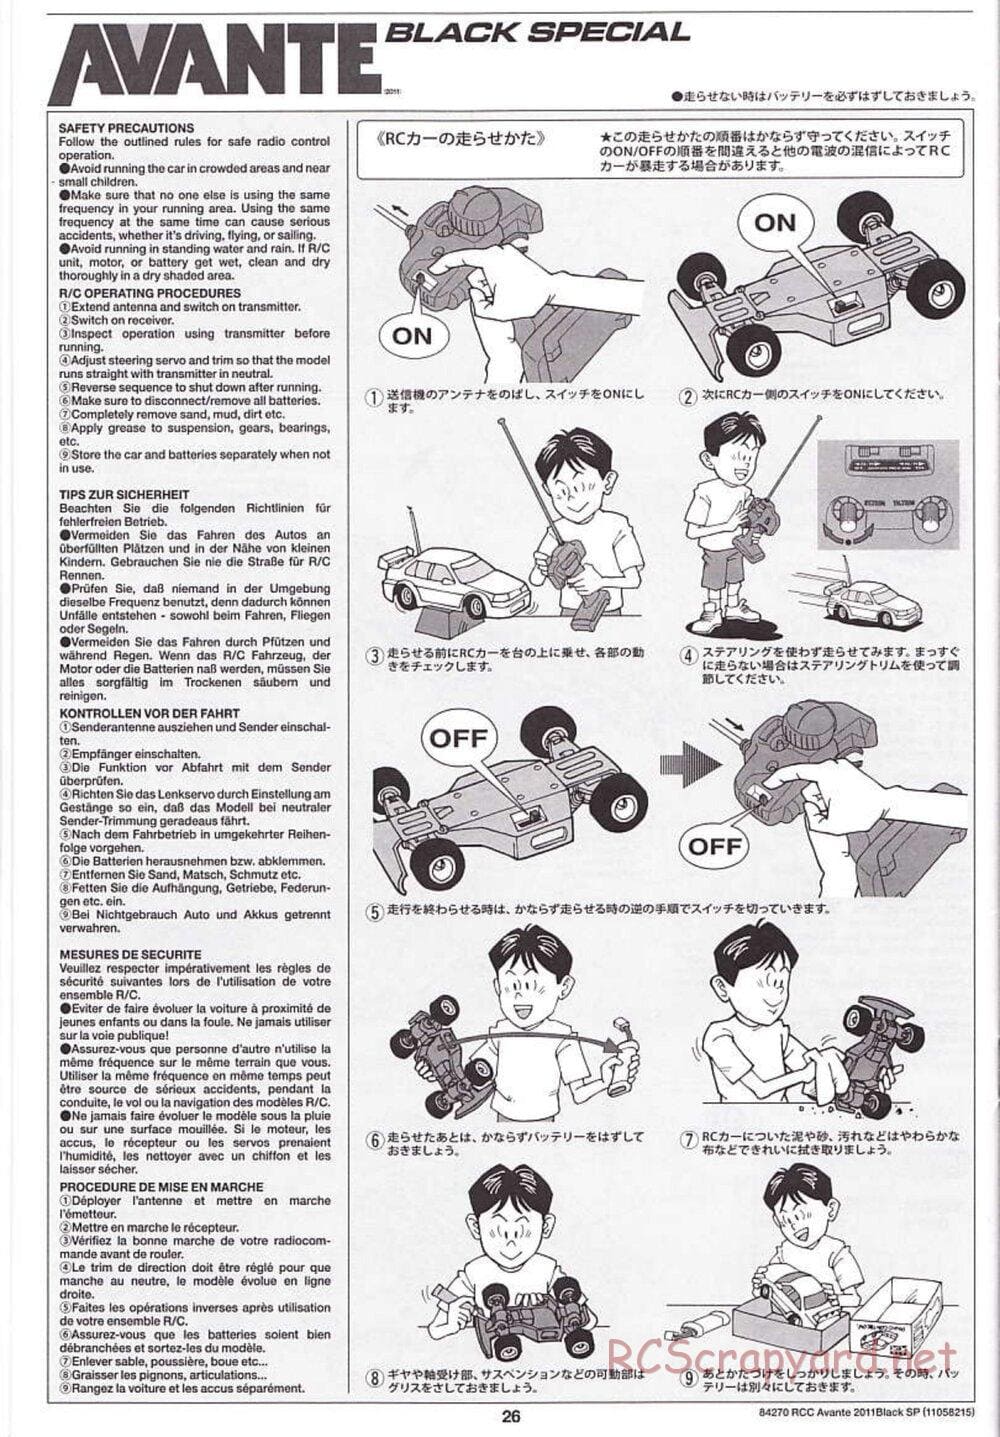 Tamiya - Avante 2011 - Black Special Chassis - Manual - Page 26